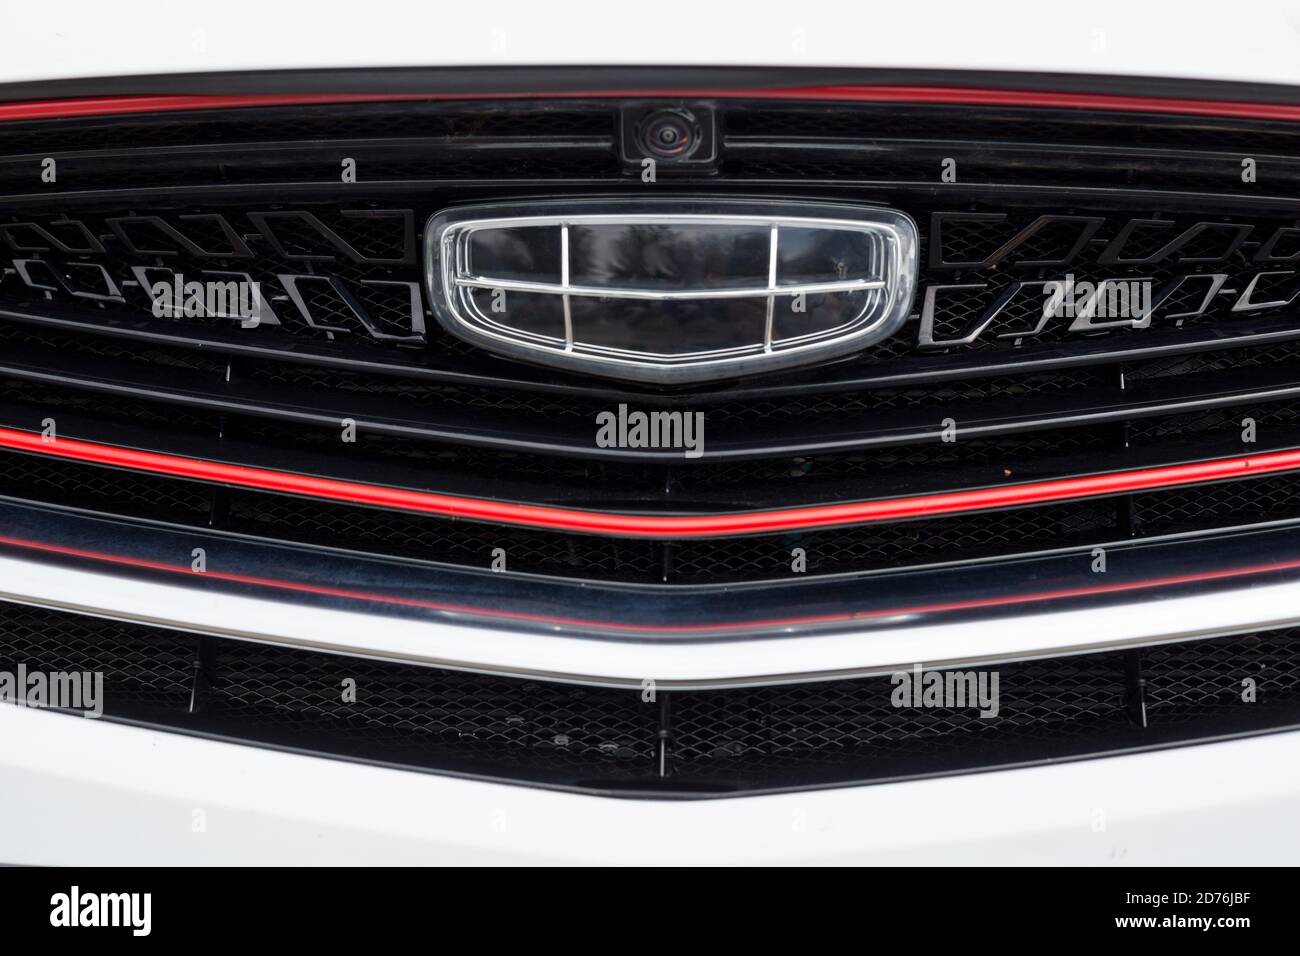 Russia, Izhevsk - August 14, 2020: Geely showroom. Logo of Geely brand on bumper of CoolRay car. Car manufacturer from China. Modern transportation. Stock Photo